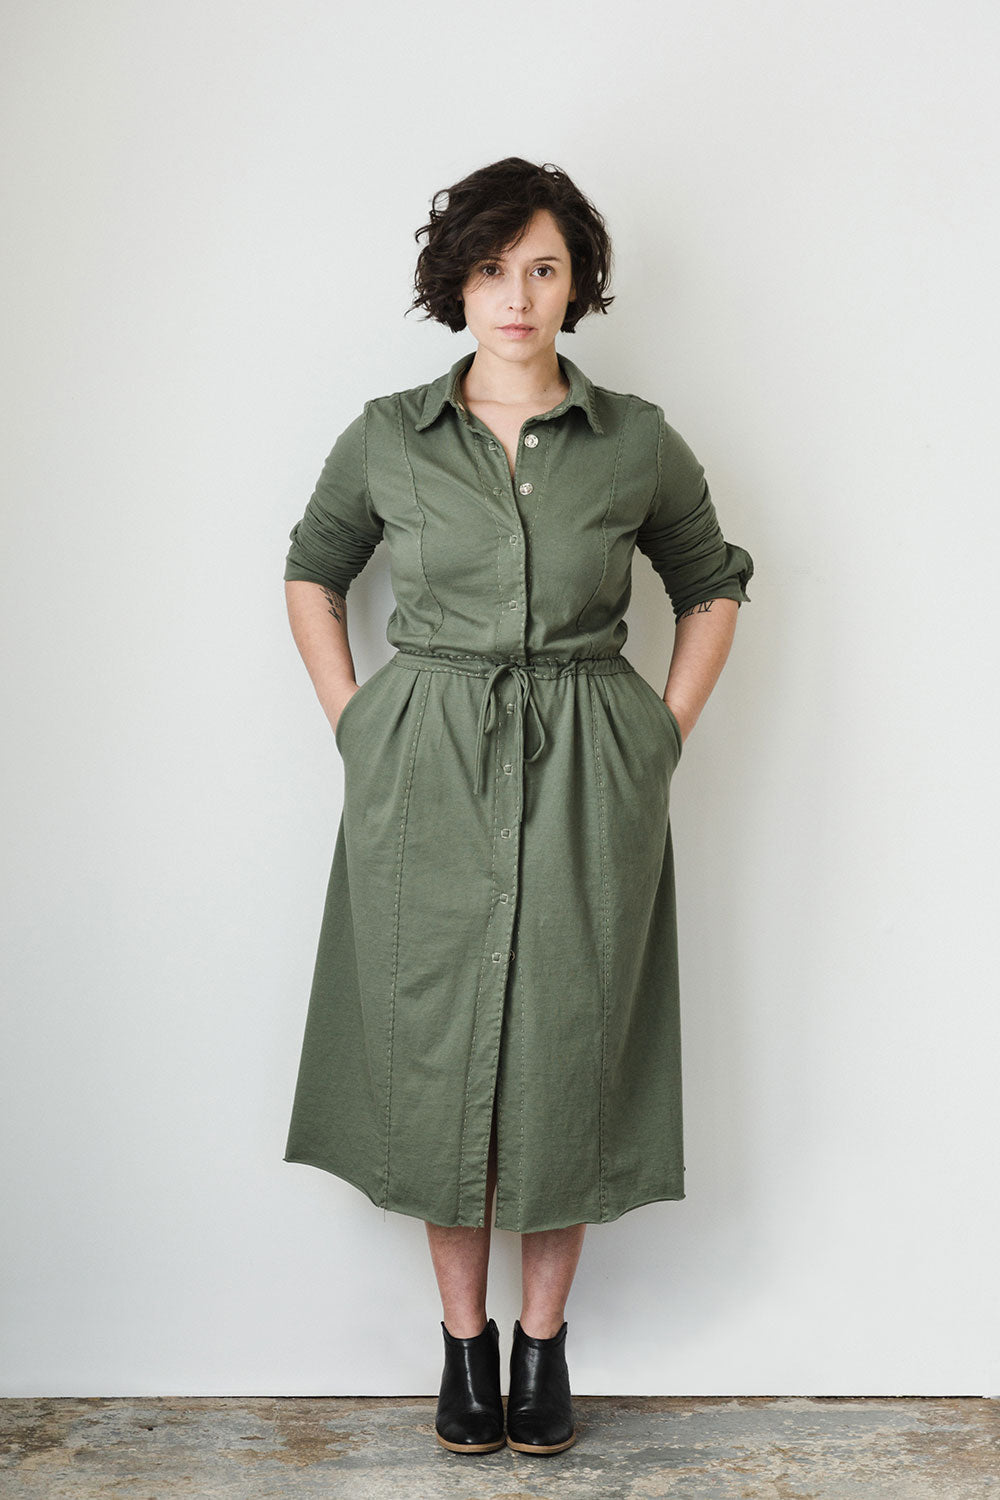 The School of Making The Jumpsuit Pattern Women's DIY Clothing Pattern for Hand-Sewn Jumpsuit and Dress